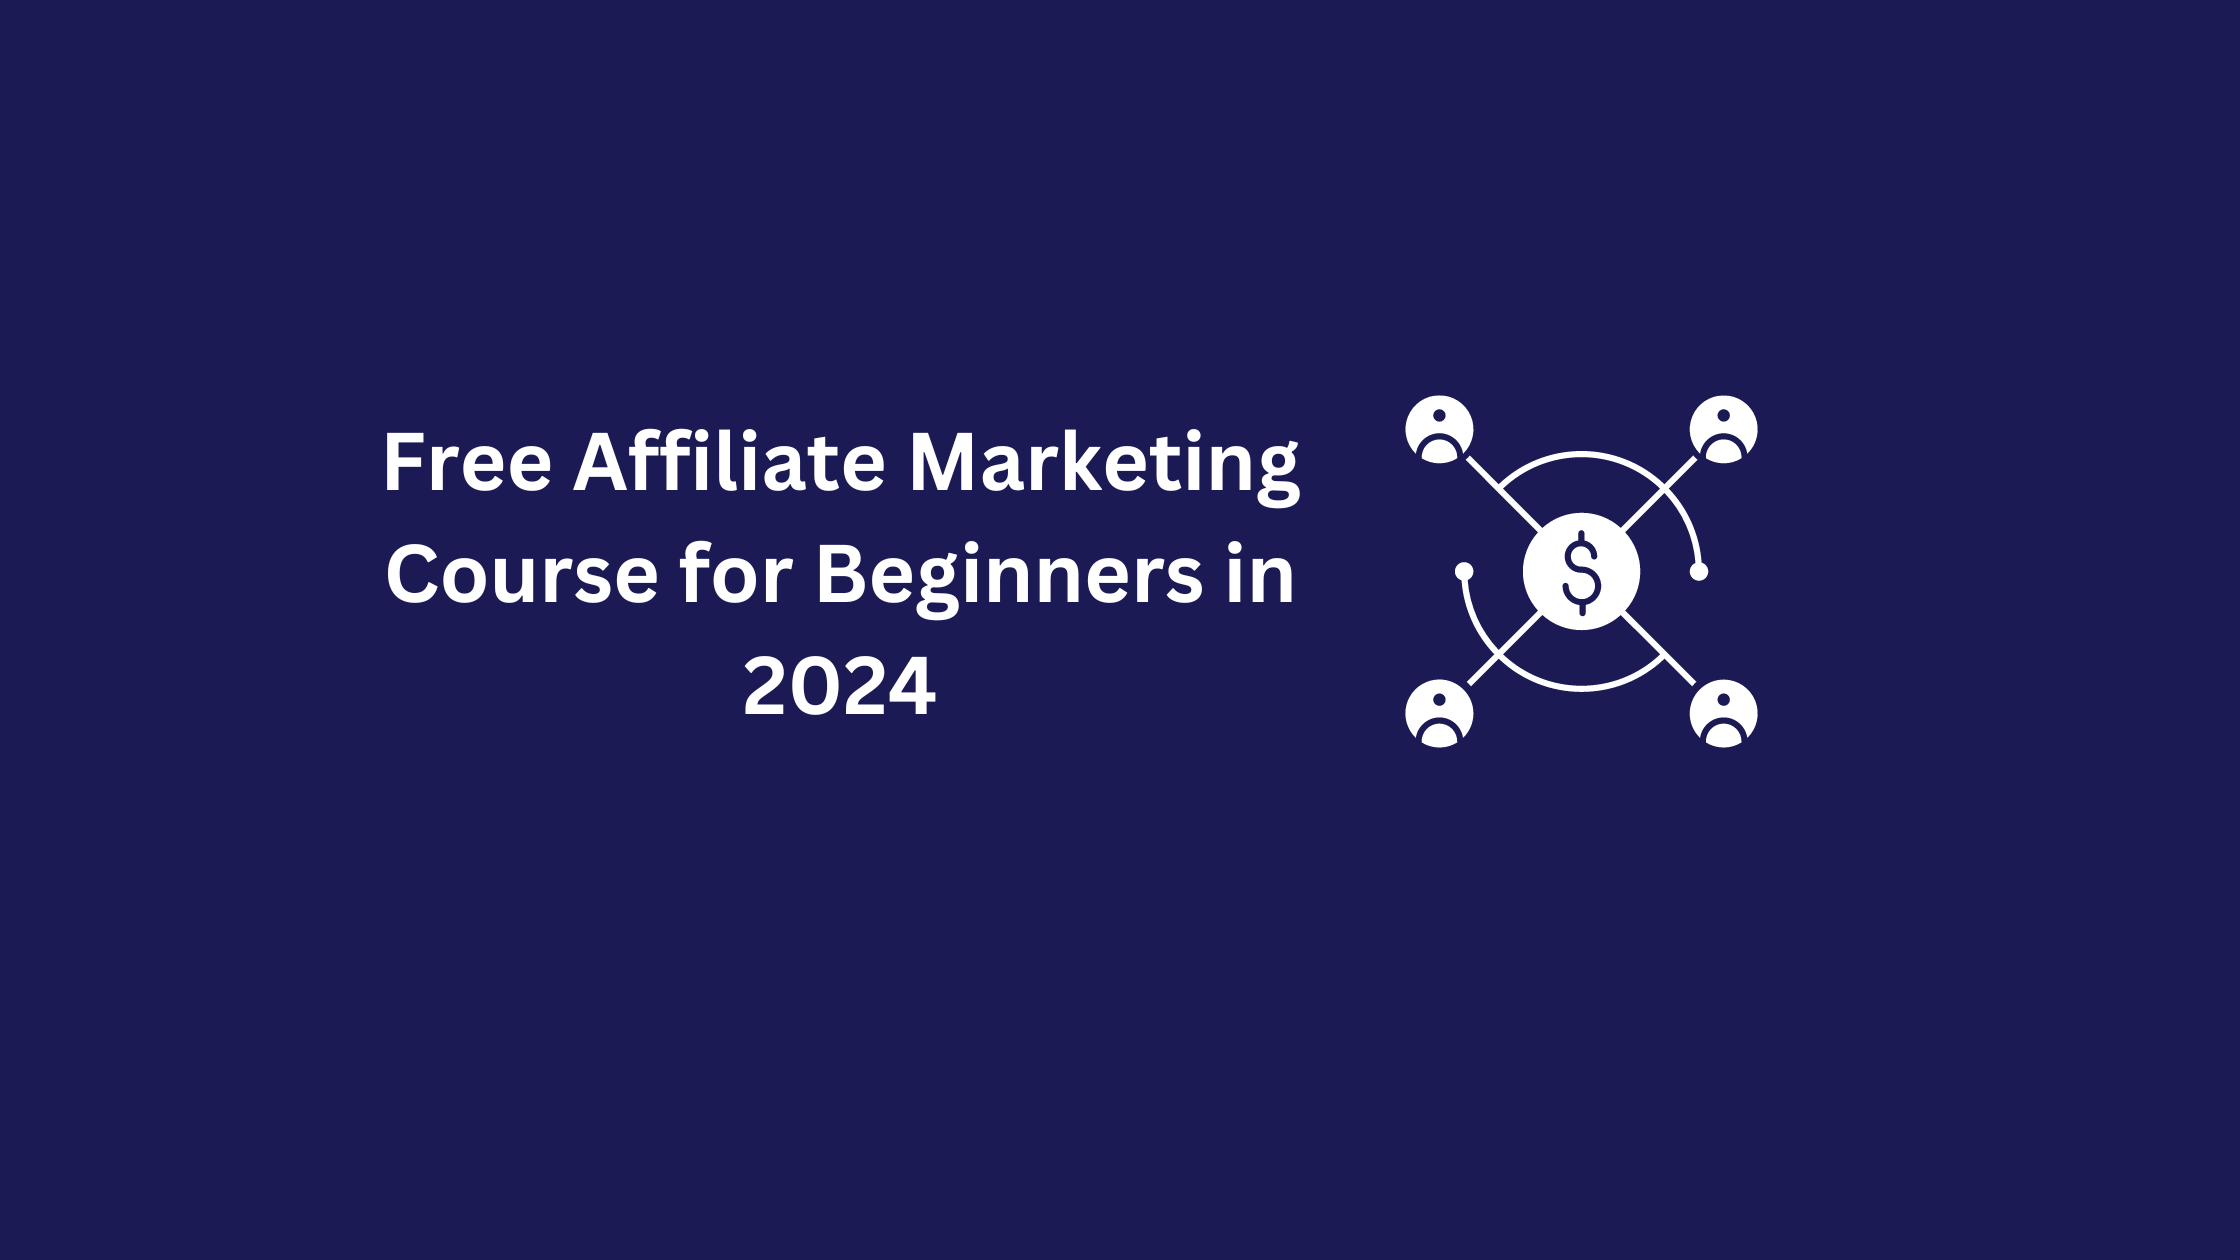 Free Affiliate Marketing Course for Beginners in 2024